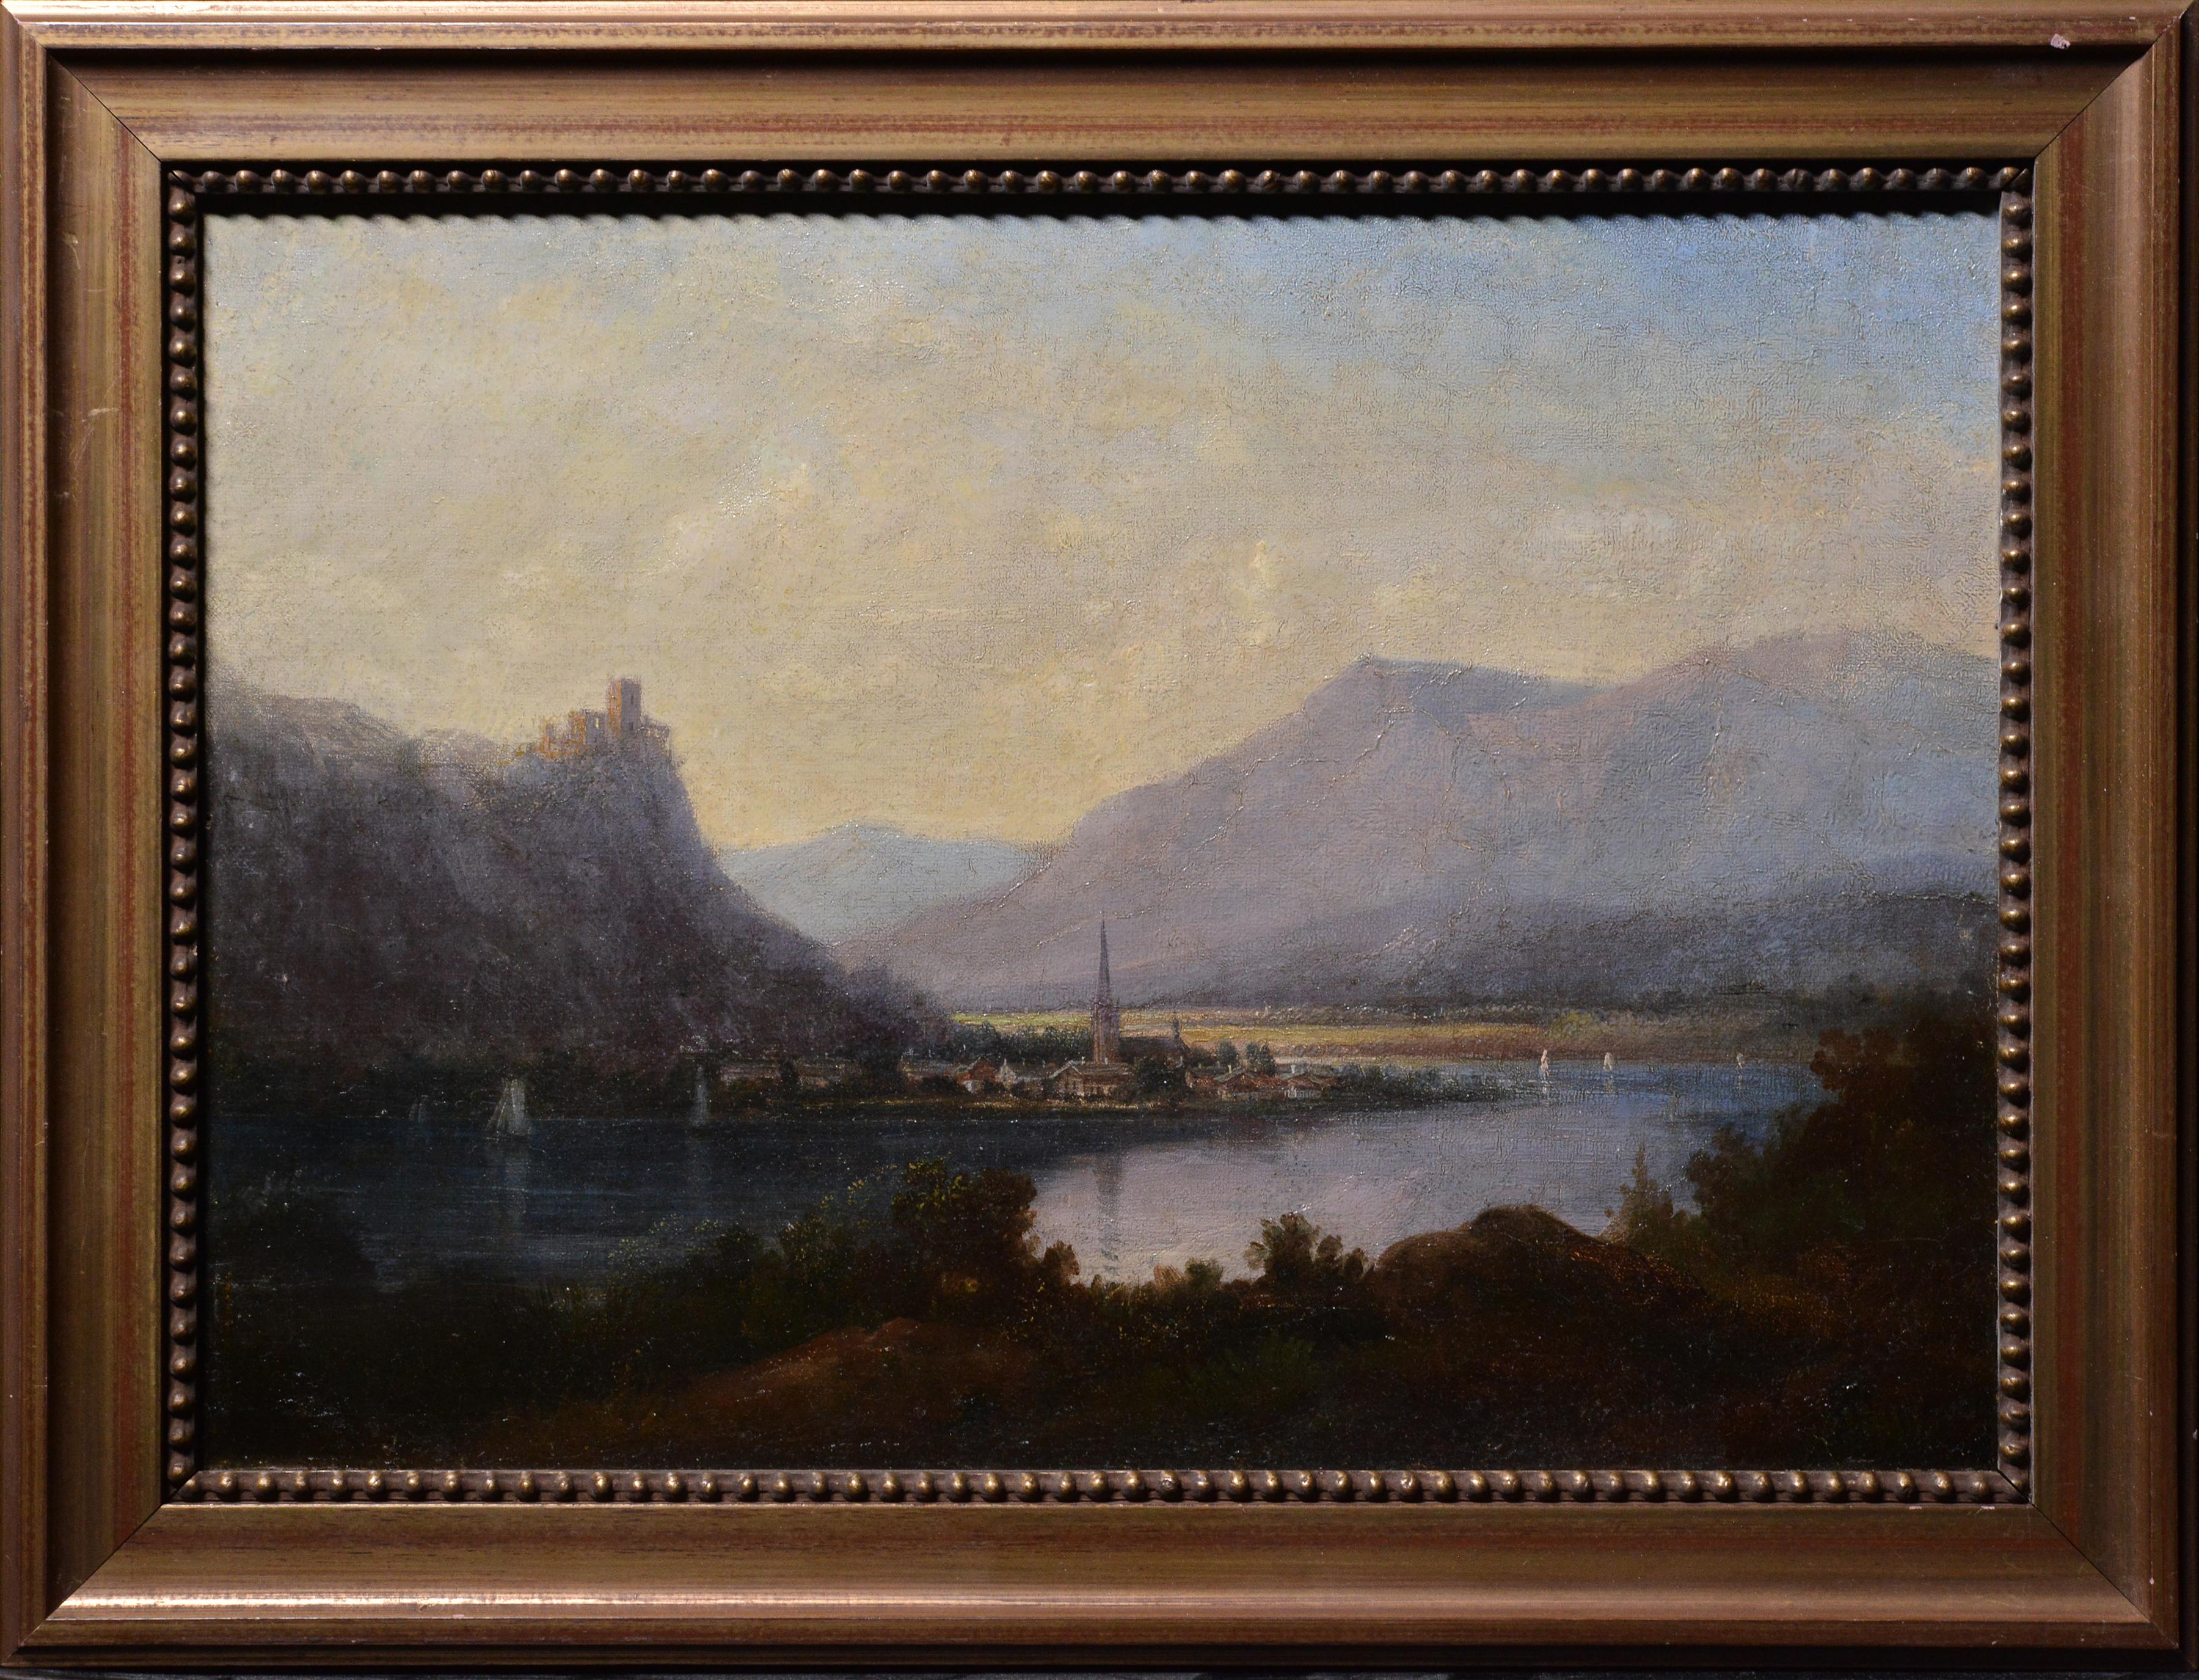 Unknown Landscape Painting - Alpine Valley Landscape with Castle on Rock and Town at River Bend 19th Century